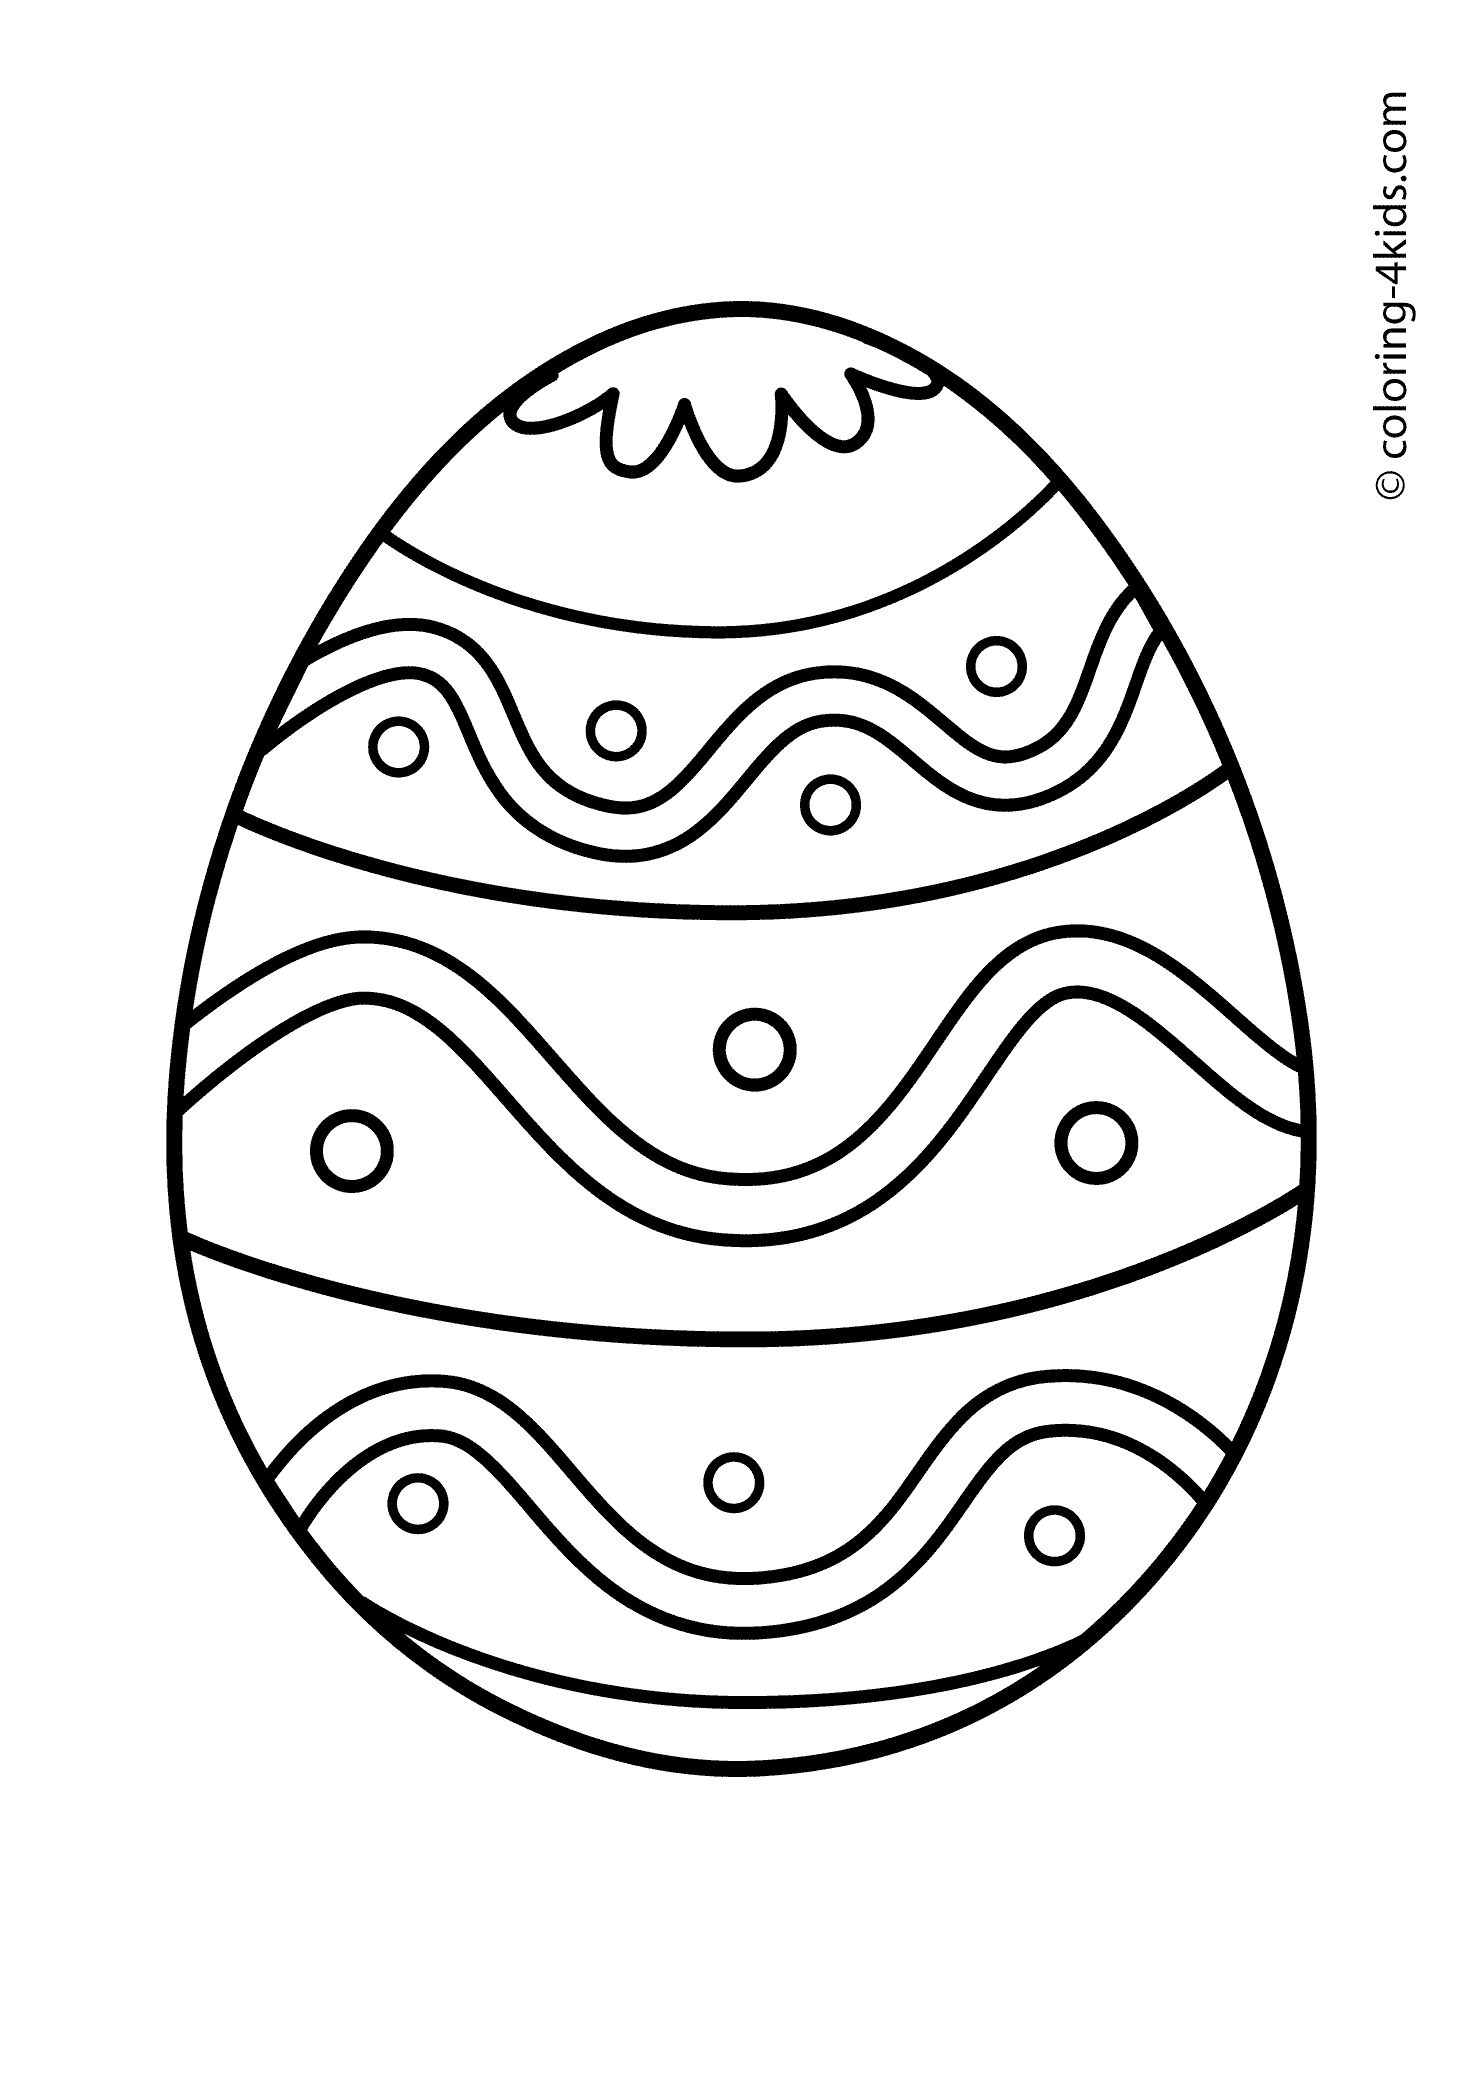 Easter Egg Colouring Pages 126